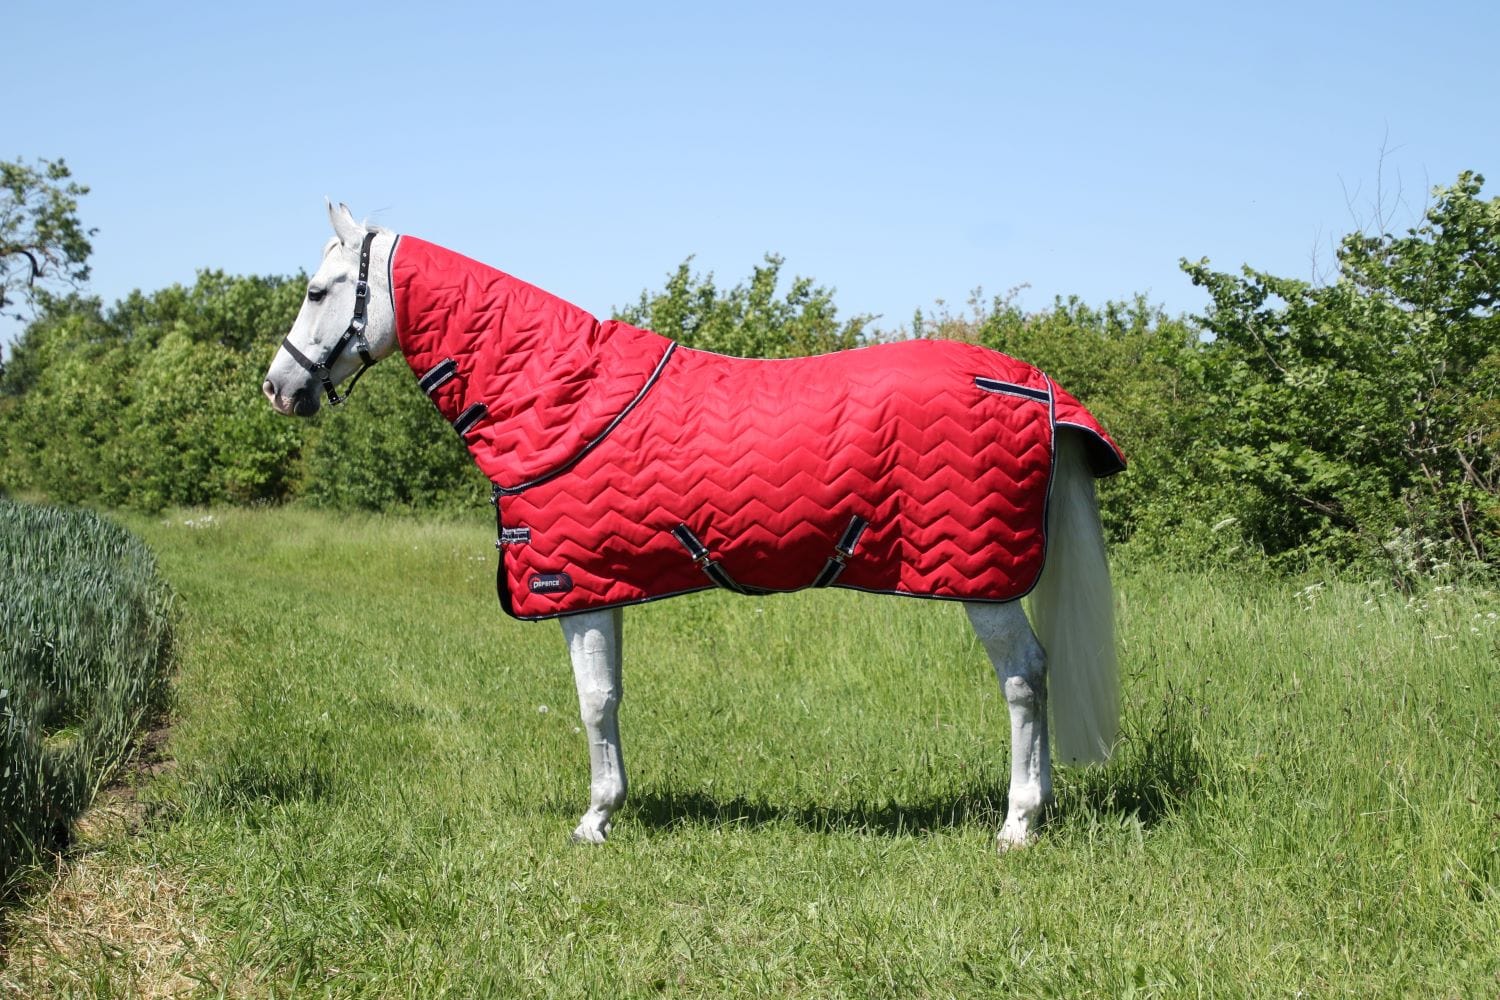 Defencex system 200 stable rug with detachable neck cover